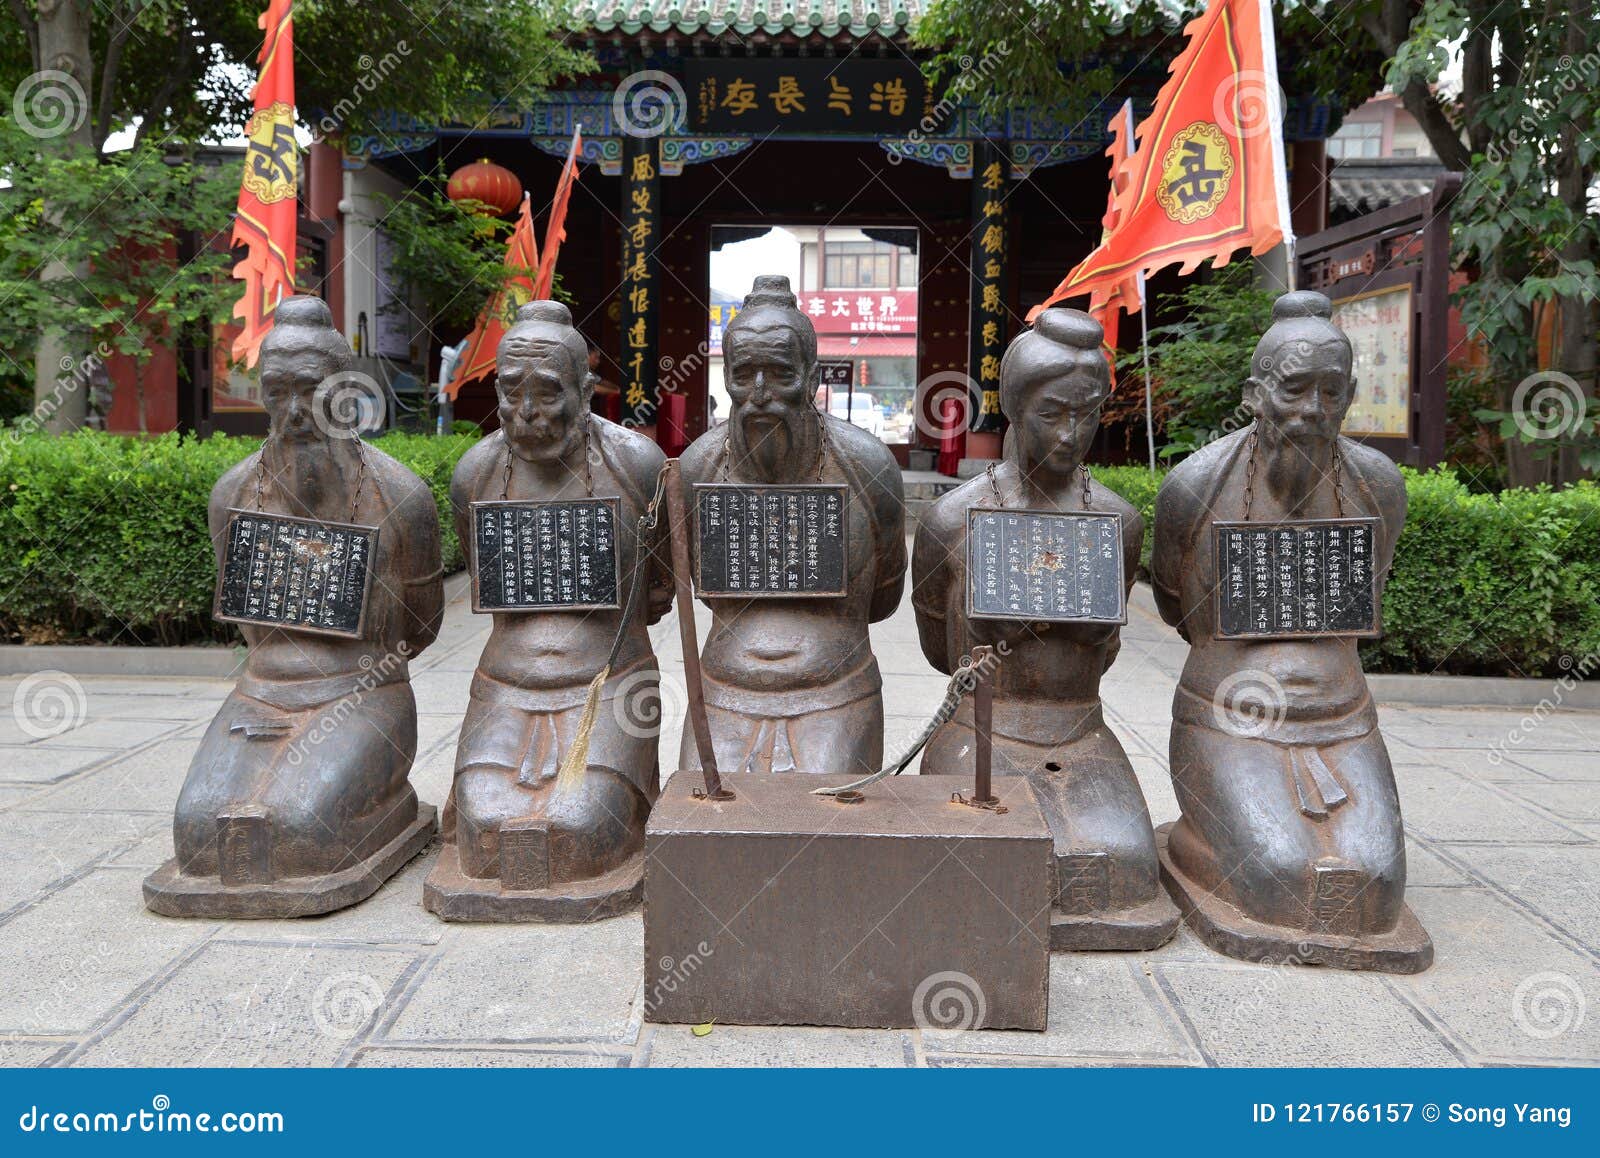 history-sinners-qinhui-statue-corrupt-officials-such-as-qinhui-song-dynasty-yue-fei-temple-henan-china-photo-121766157.jpg